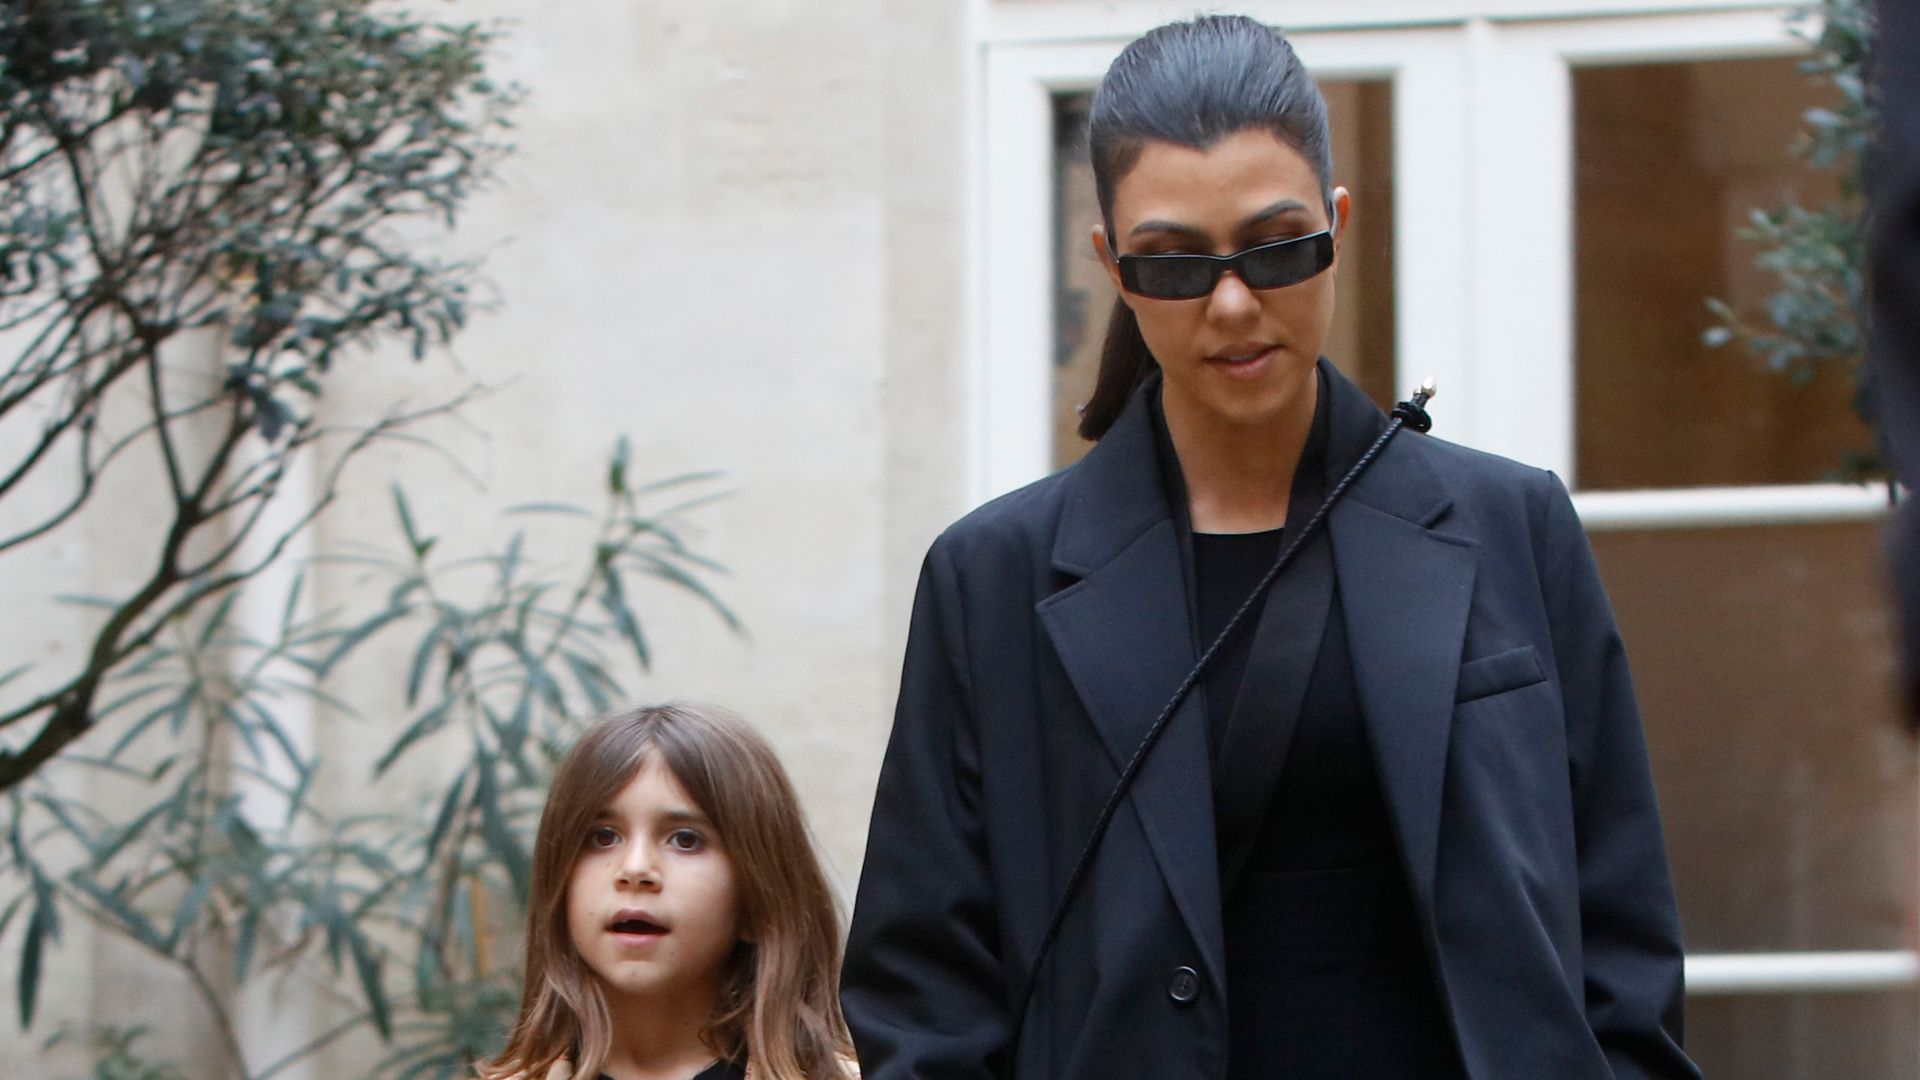 Kourtney Kardashian, her daughter Penelope Disick pictured at the Cafe de Flore in Paris March 02, 2020 in Paris, France.  (Photo by Mehdi Taamallah/NurPhoto via Getty Images)